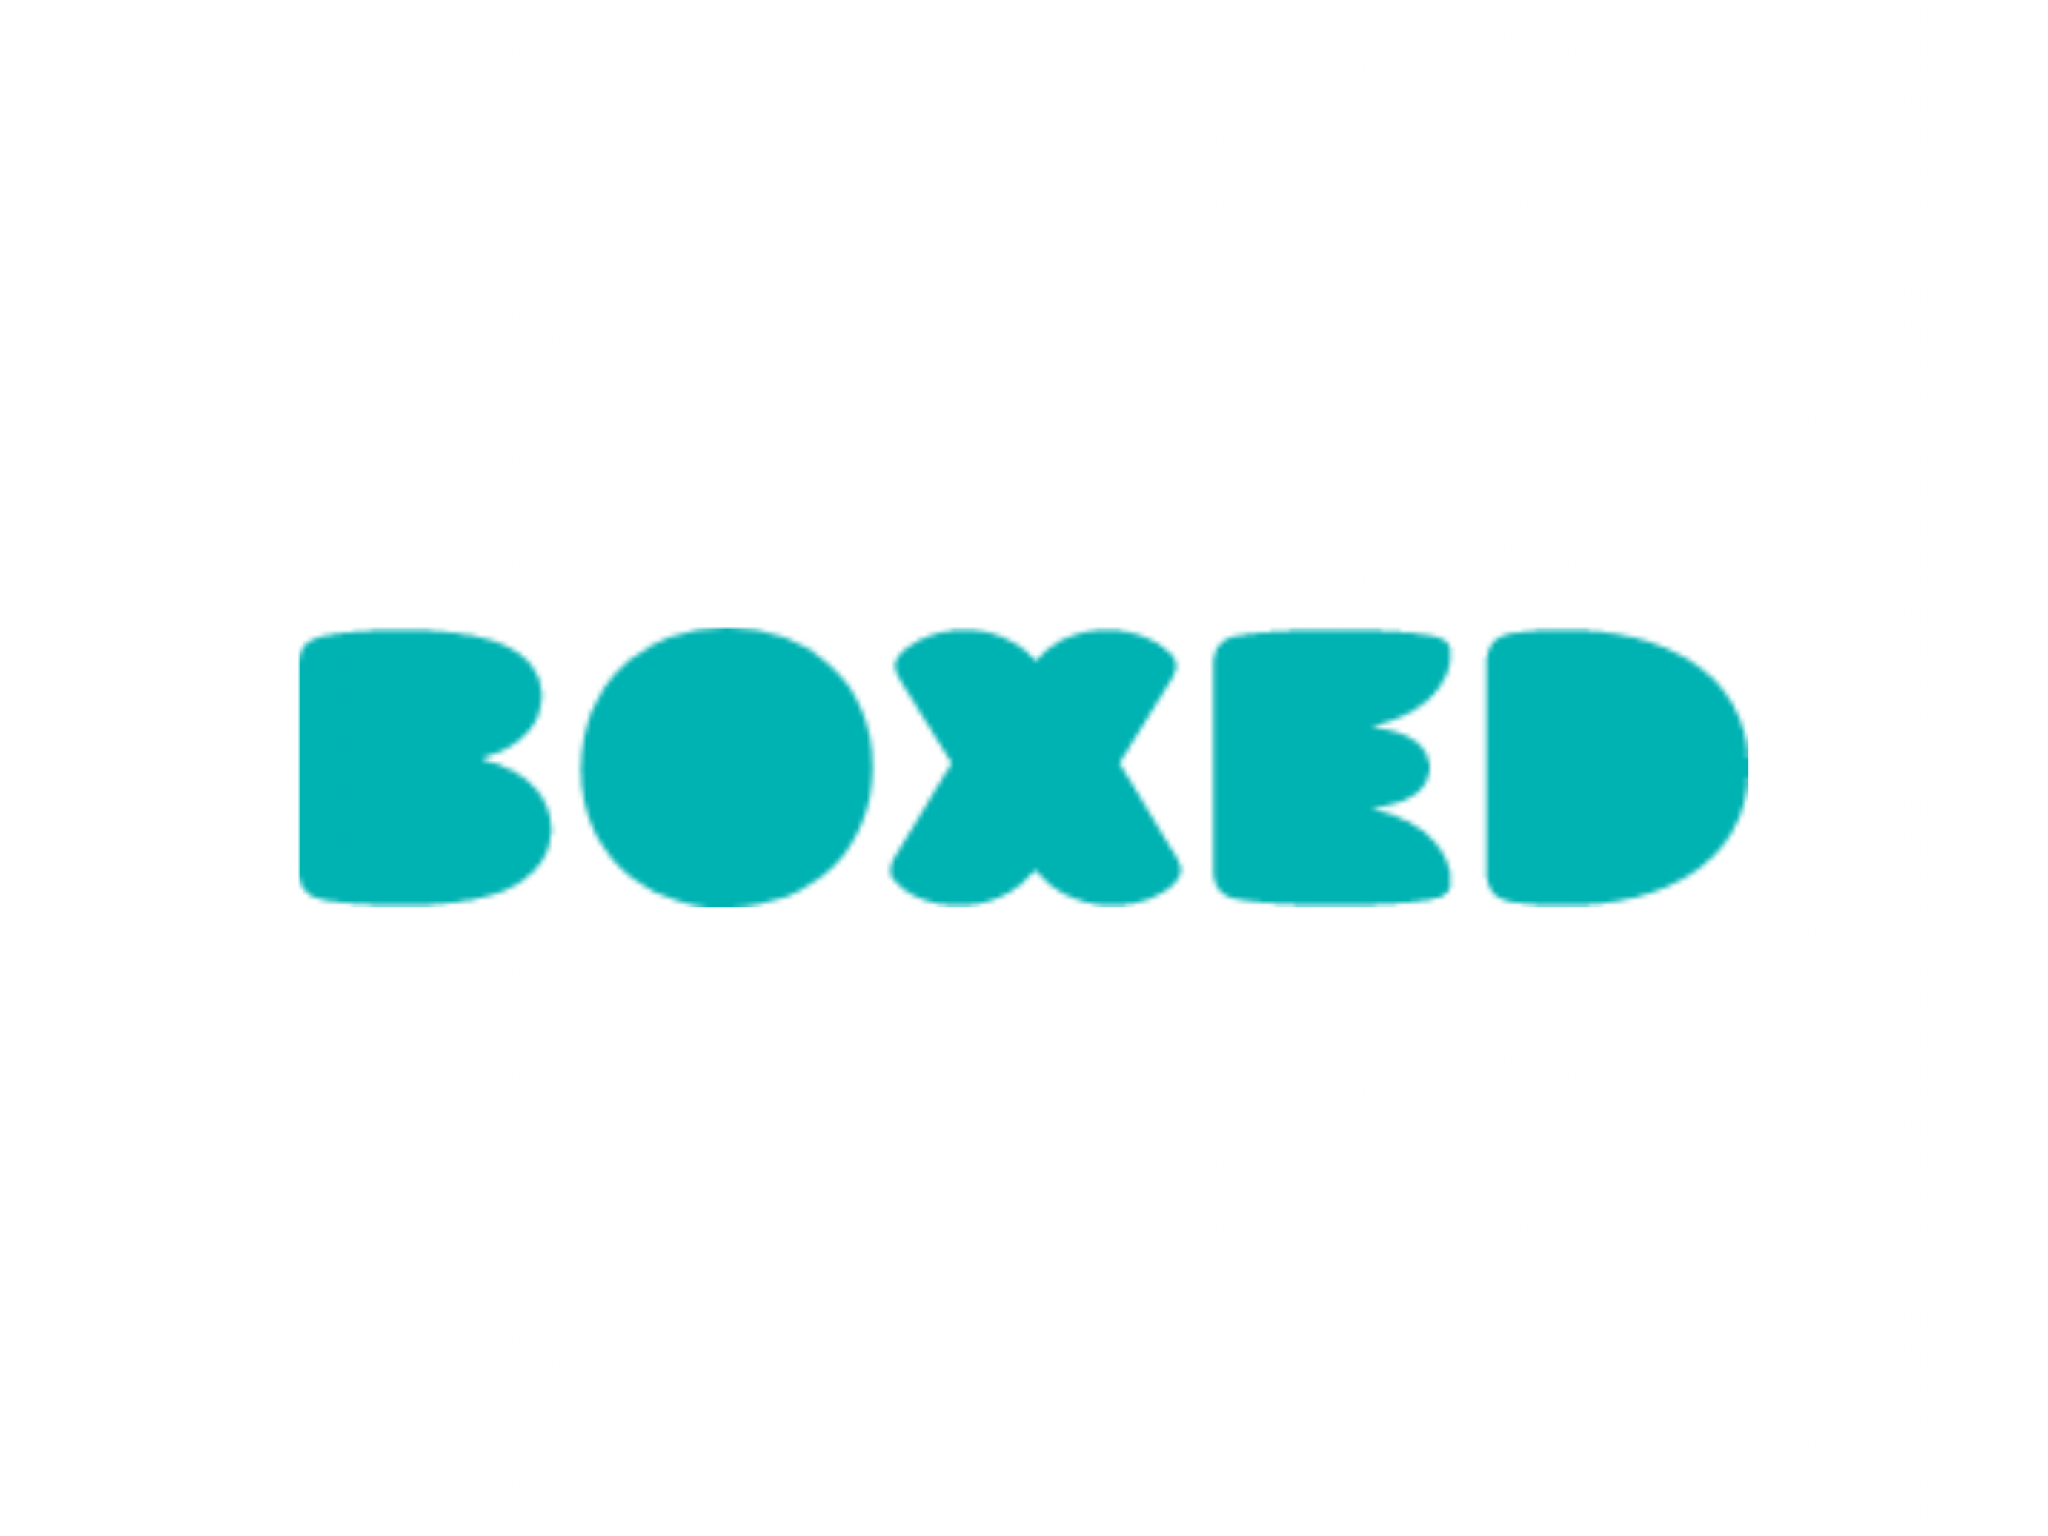  boxed-files-for-bankruptcy-to-divest-software-business 